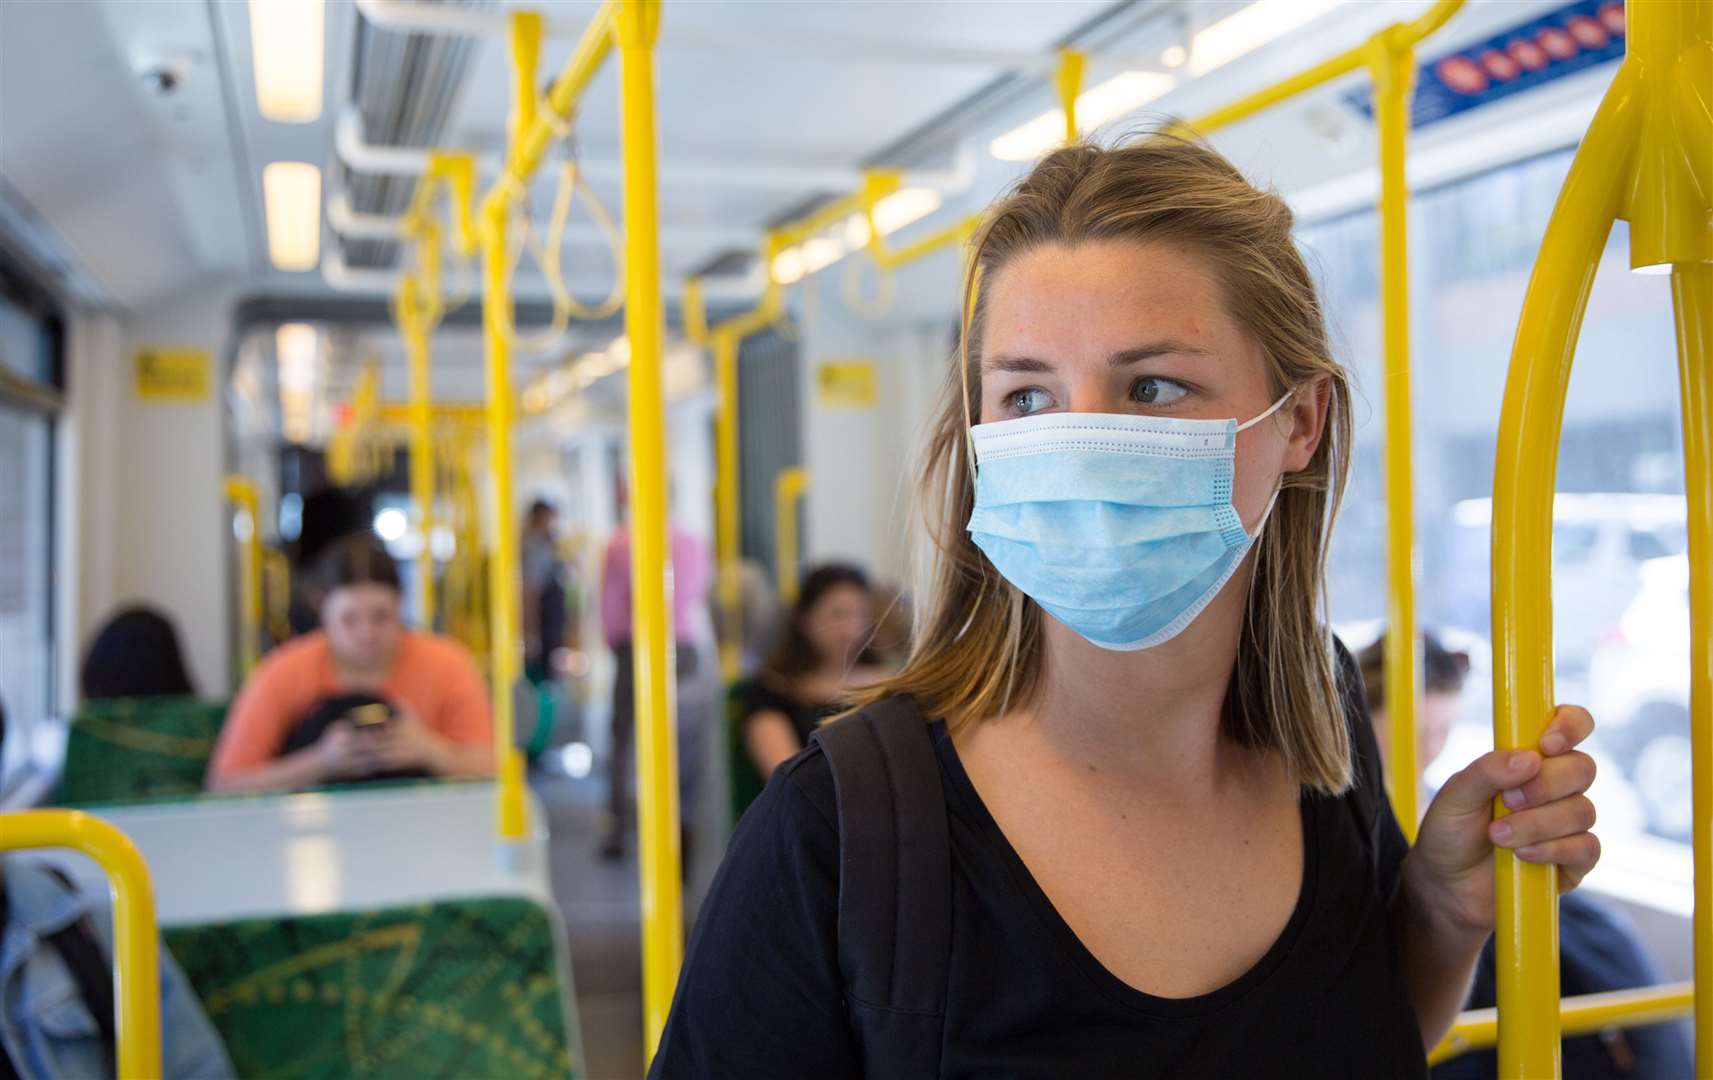 Face coverings are now mandatory on public transport - but still optional for visits to the shops